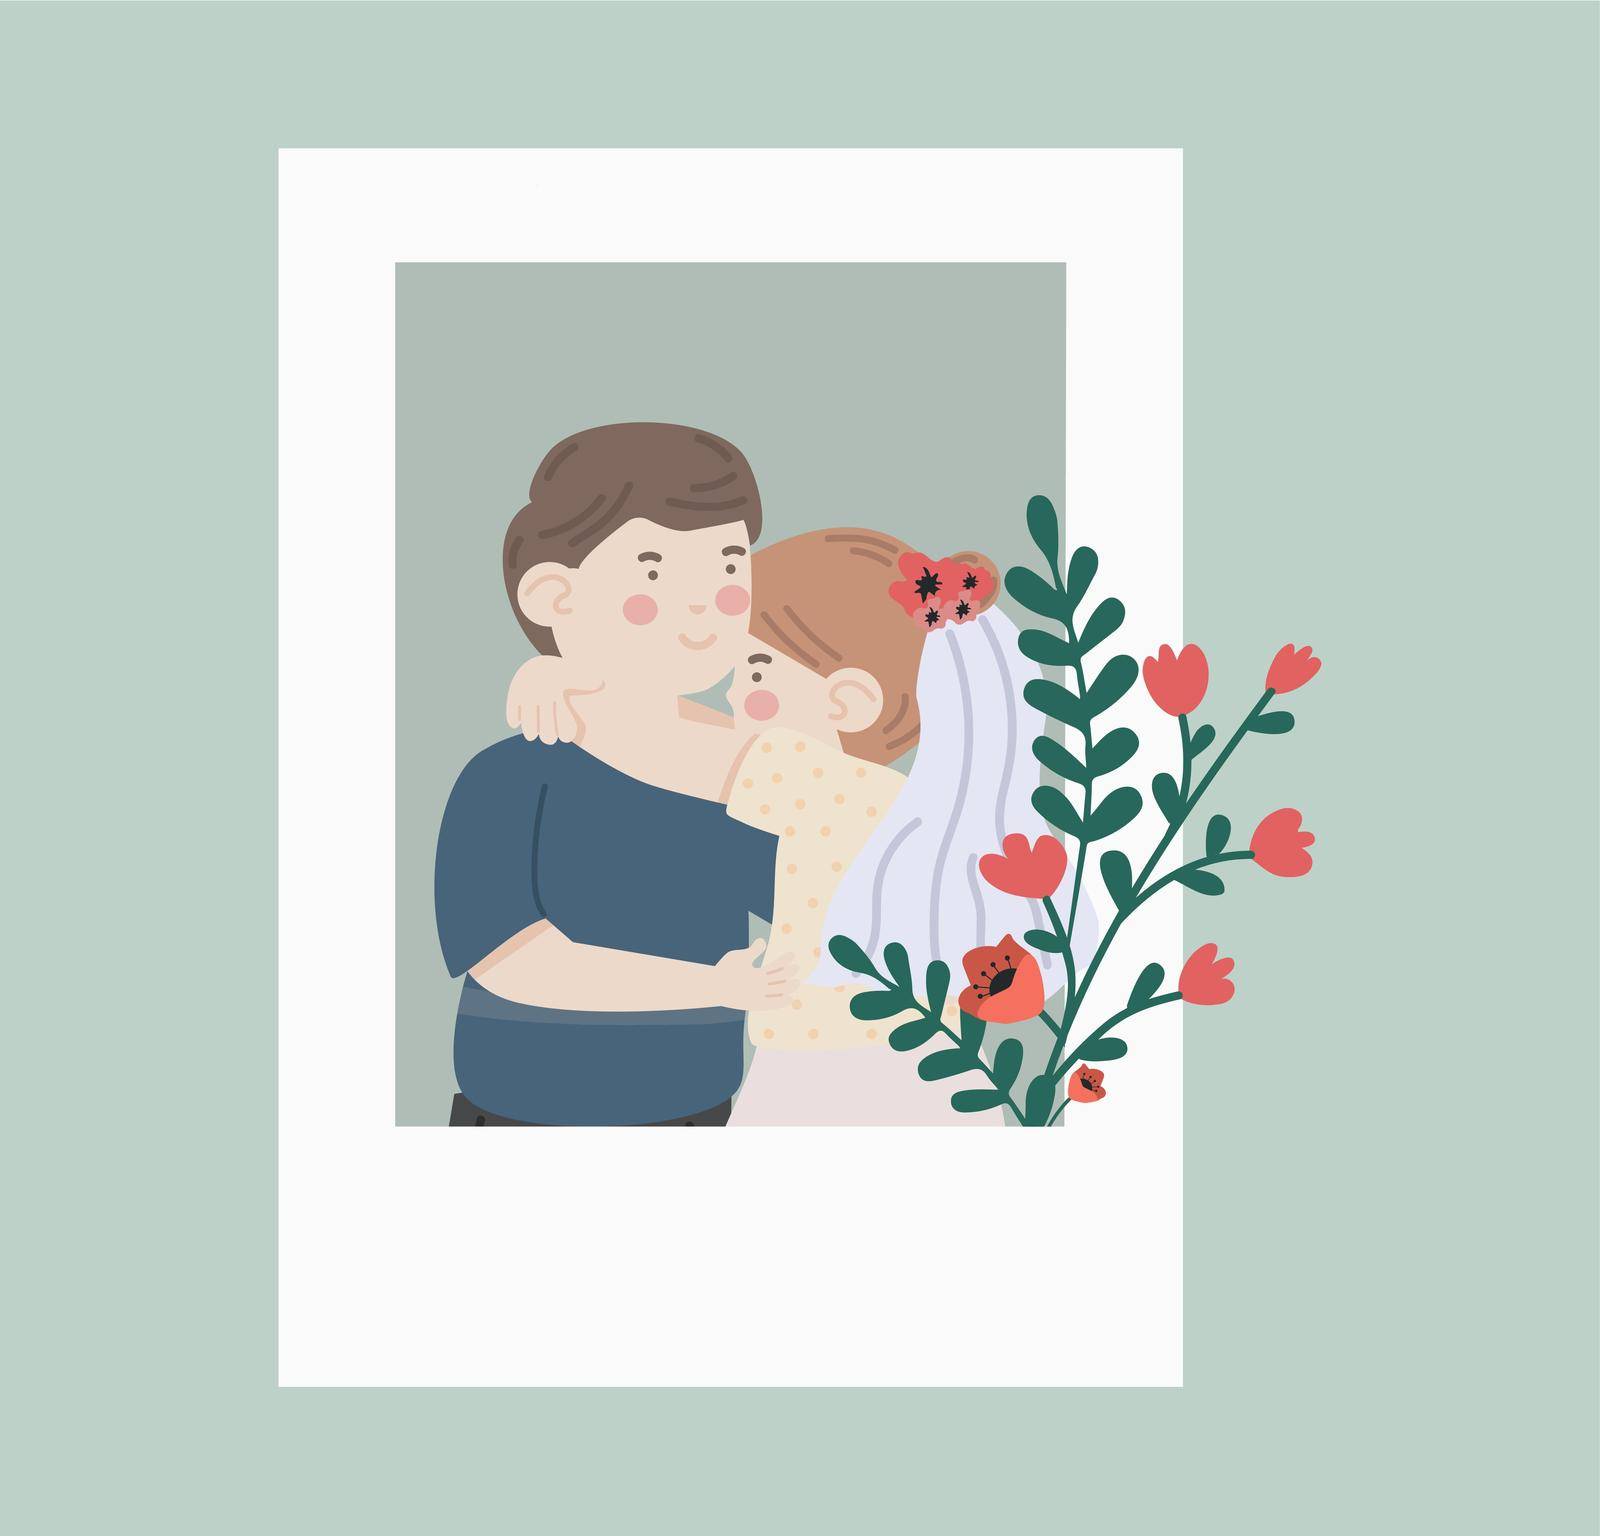 Man with women hug Couple wedding character   by focus_bell